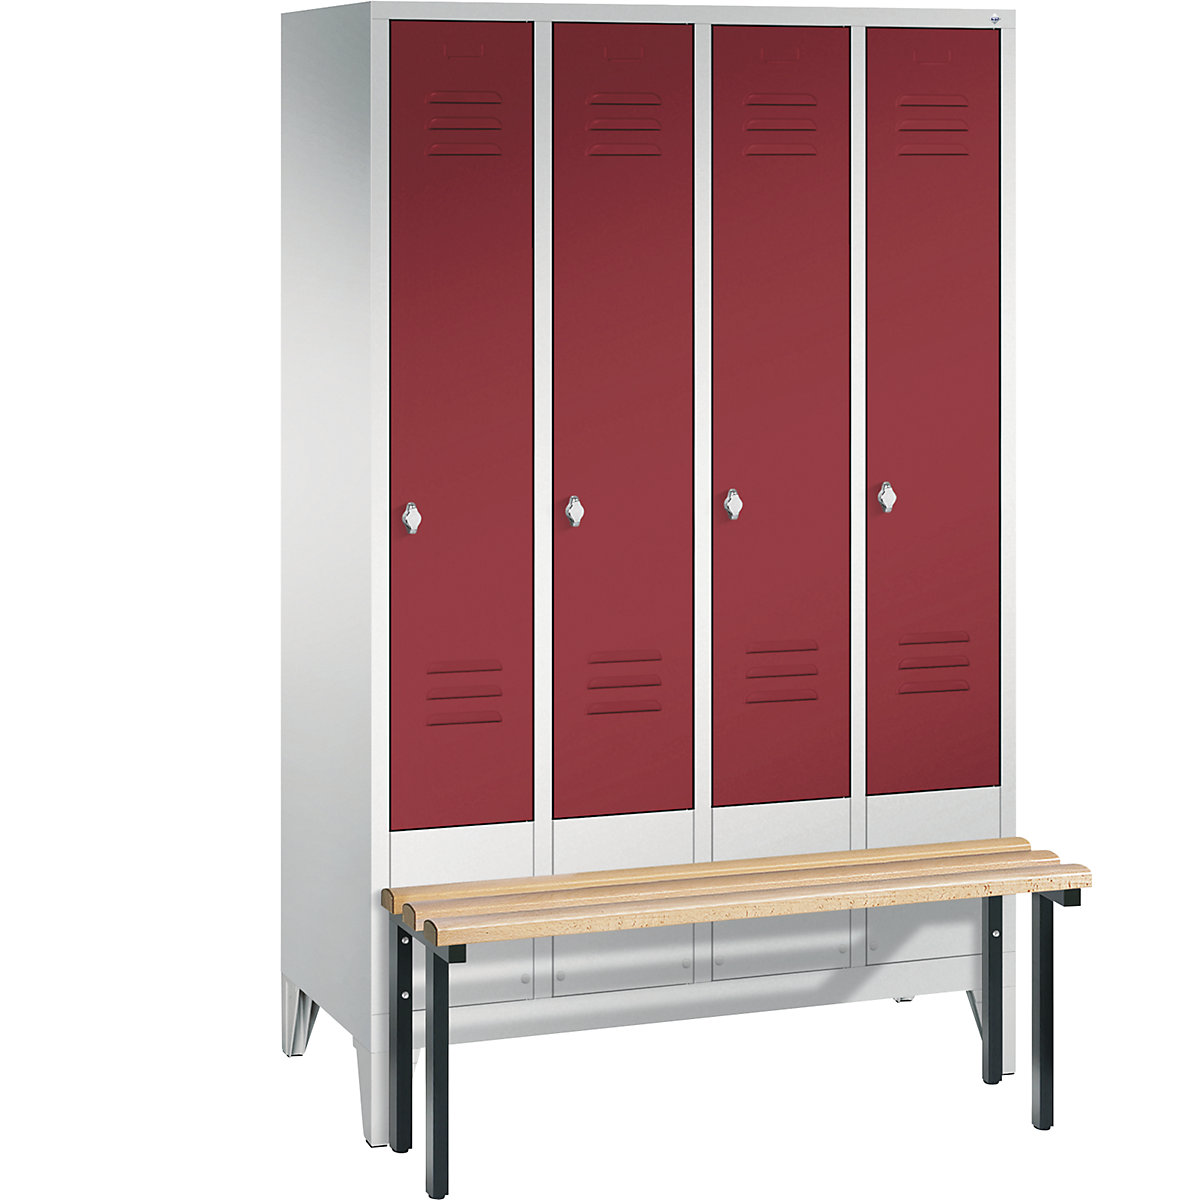 CLASSIC cloakroom locker with bench mounted in front – C+P, 4 compartments, compartment width 300 mm, light grey / ruby red-12